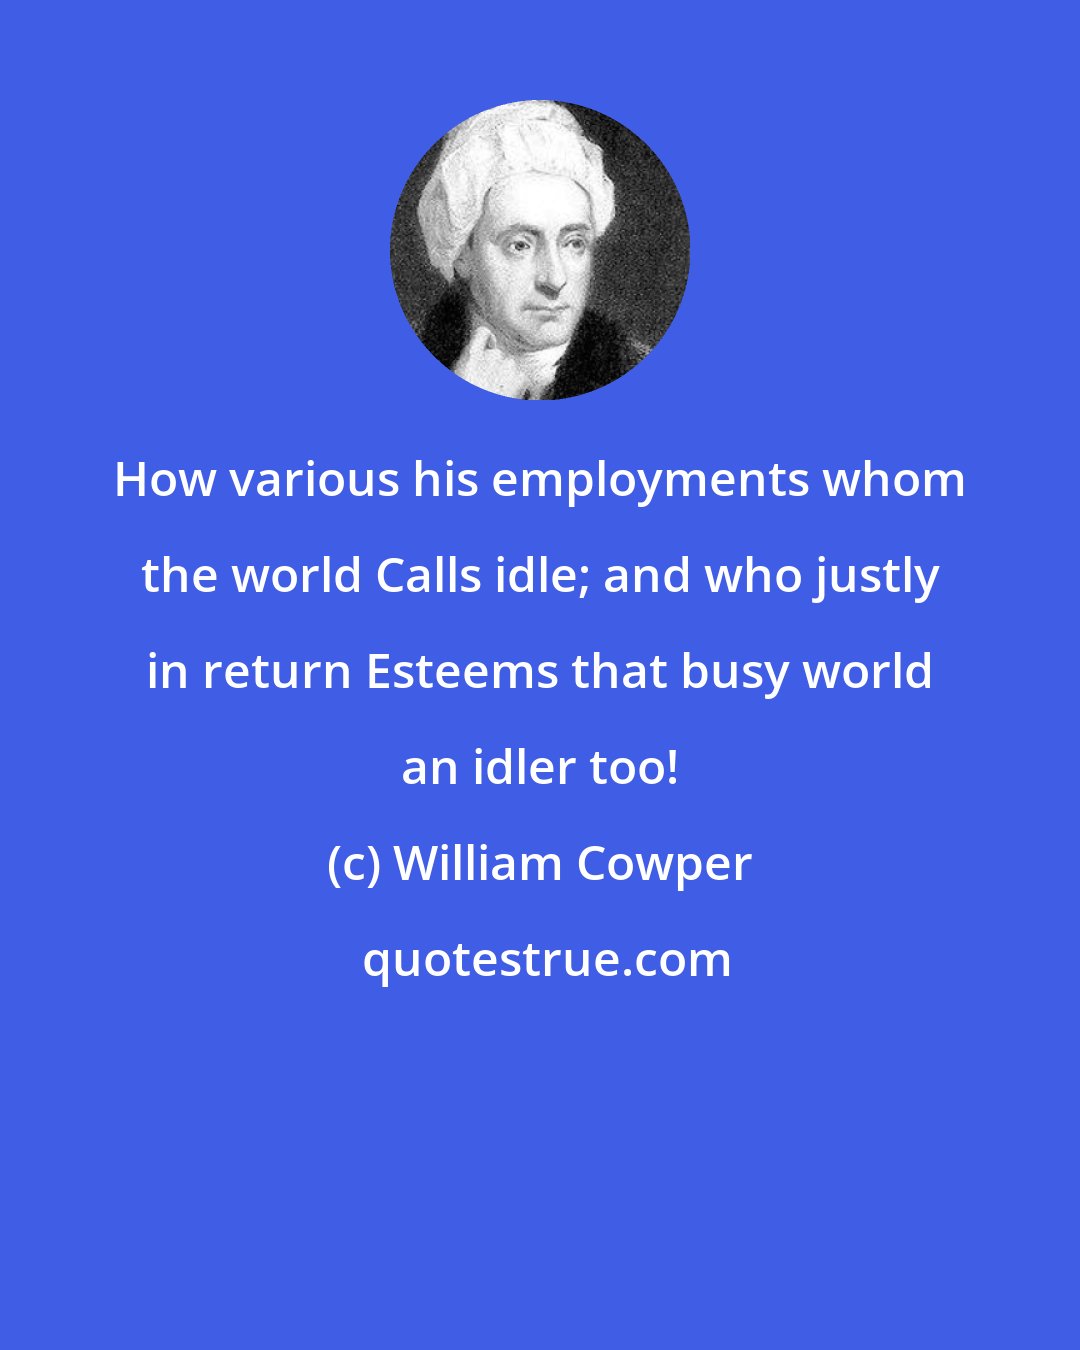 William Cowper: How various his employments whom the world Calls idle; and who justly in return Esteems that busy world an idler too!